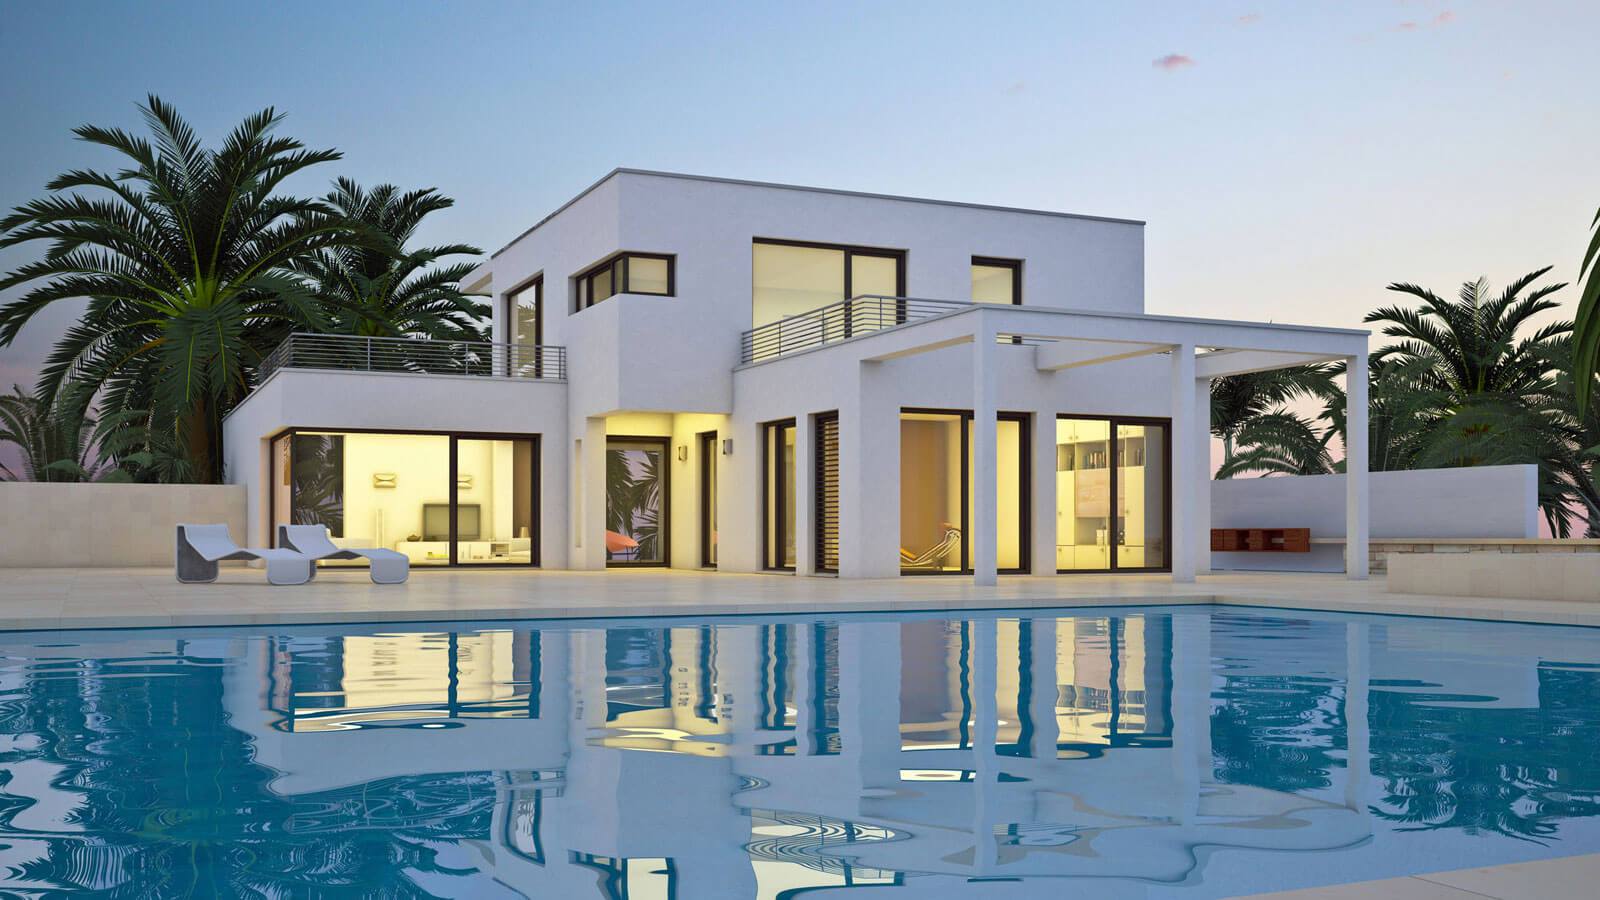 Overview of the Malta Property Market Trends